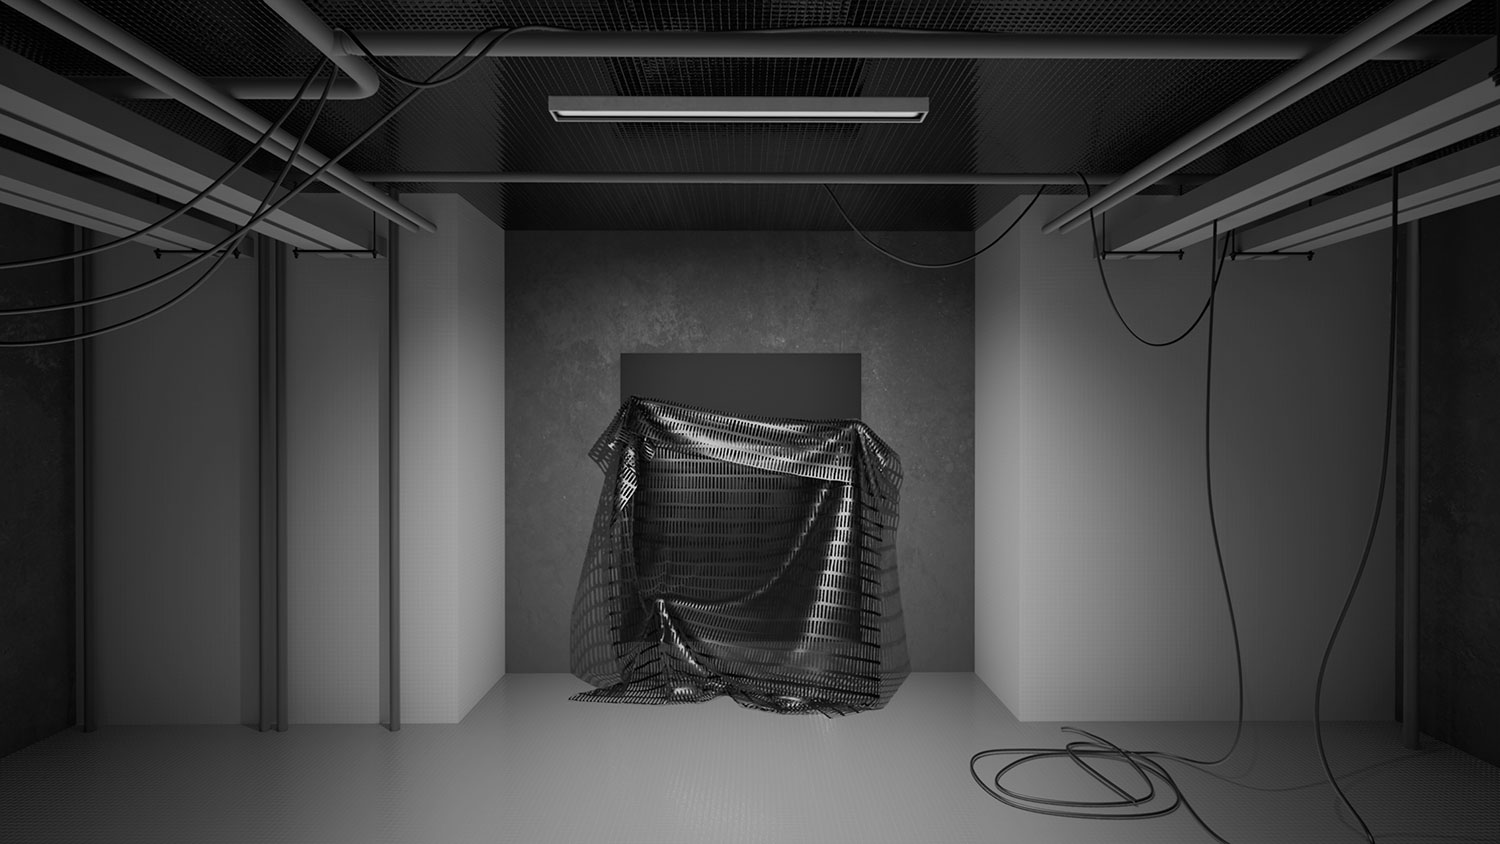 Cables and Canvas (Painting Composition), Video Still, 2021, Claudia Brăileanu